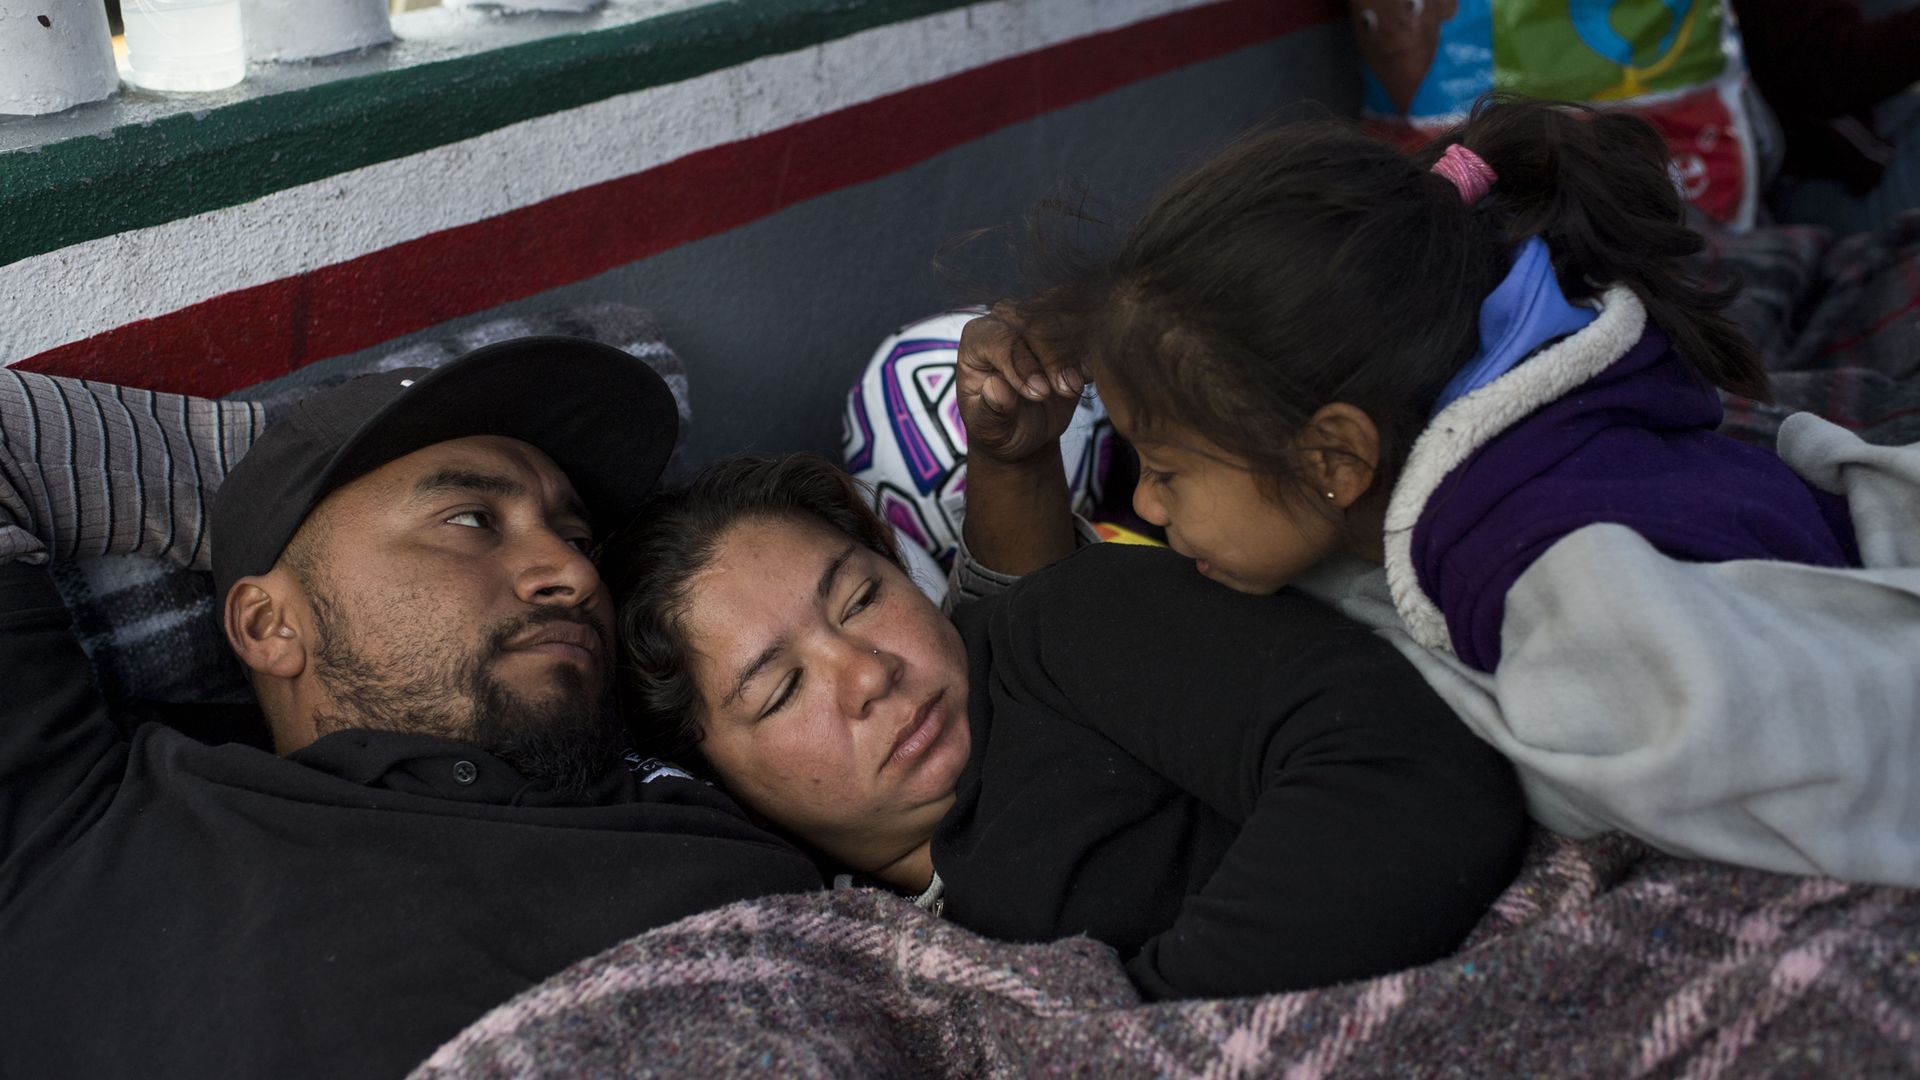 An immigrant family resting while en route from Central America to the U.S. border